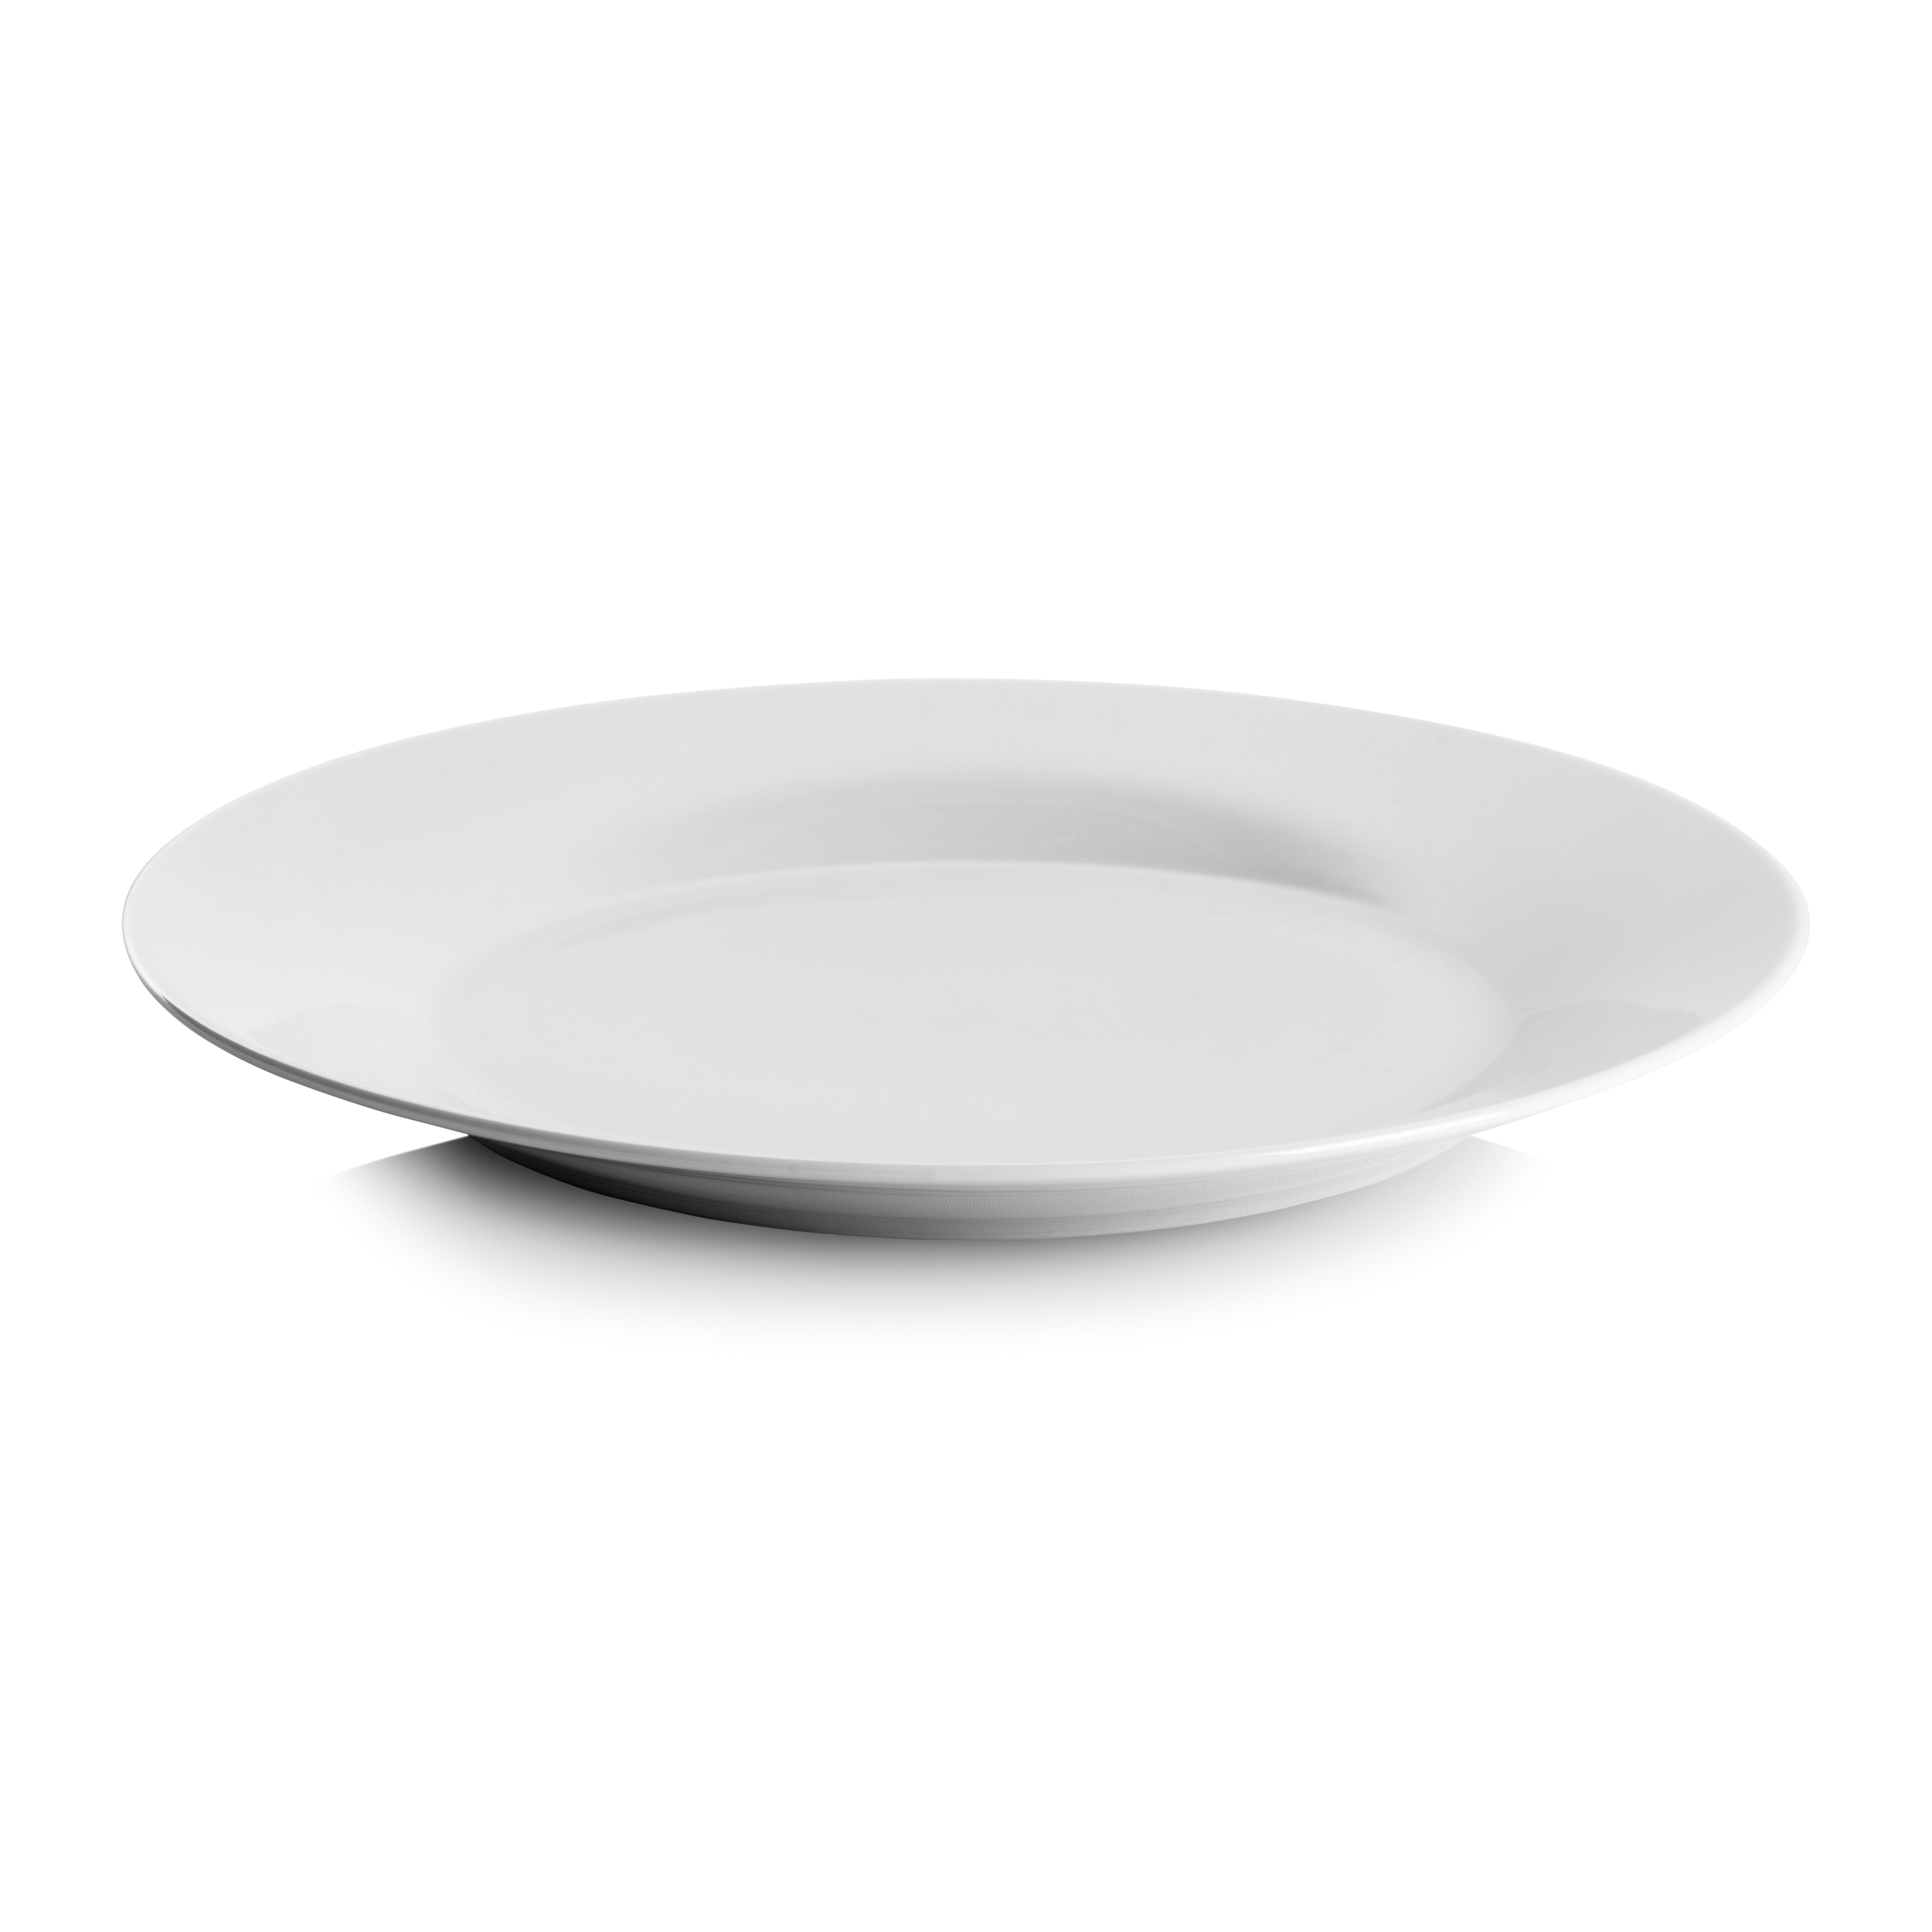 10 Strawberry Street Catering Set 10-1/2-Inch Dinner Plate, Set of 12 by 10 